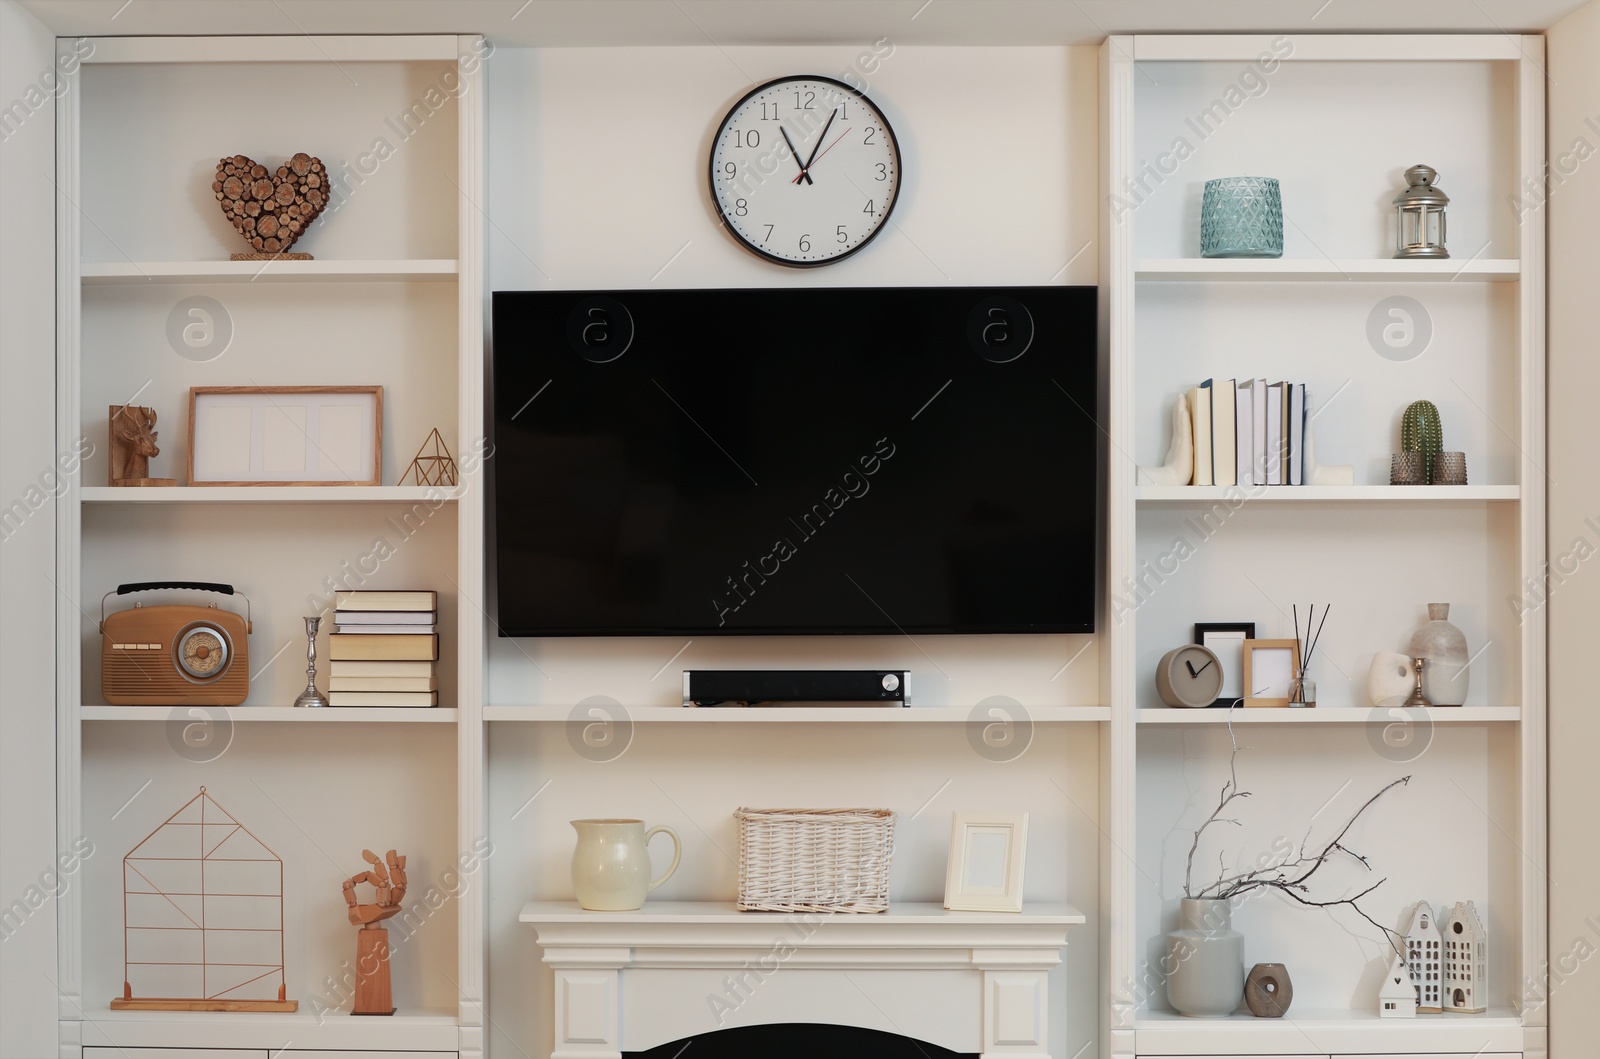 Photo of Stylish shelves with different decor elements and TV set in living room. Interior design